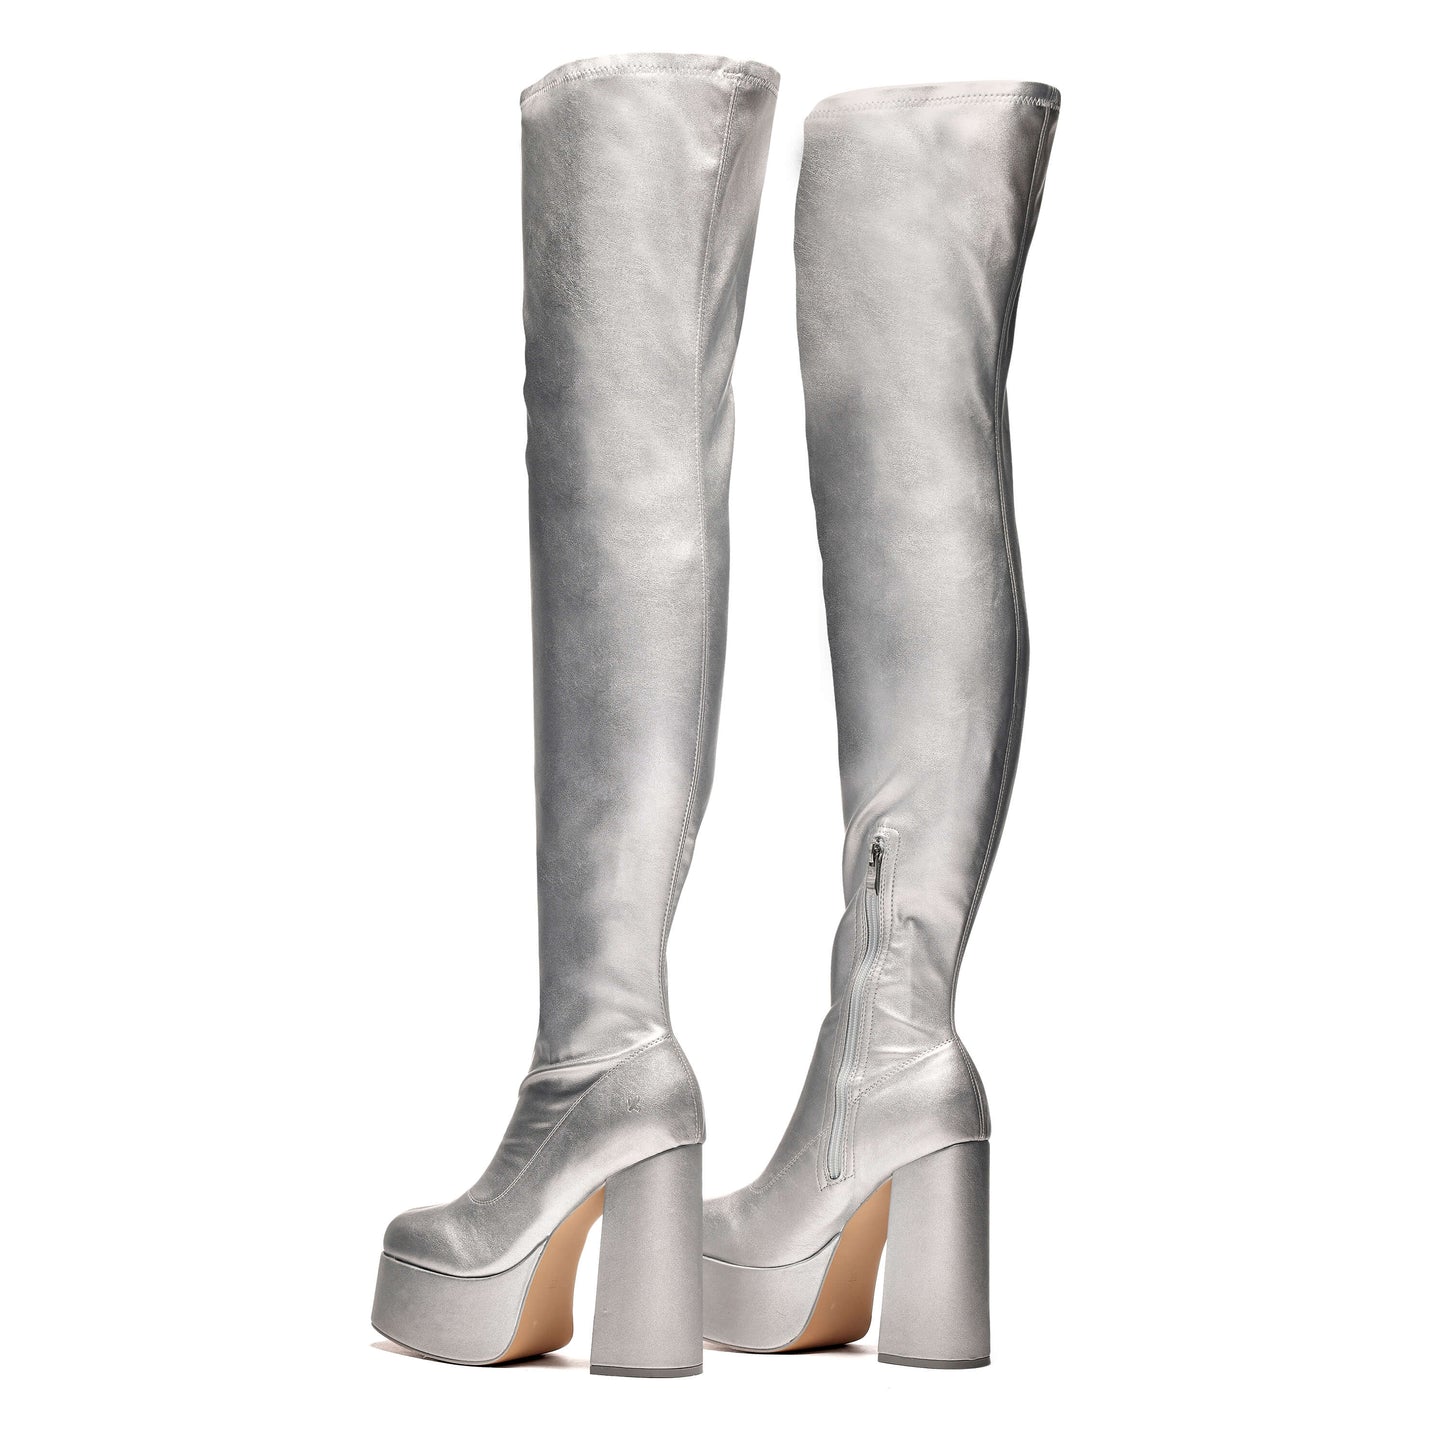 The Redemption Stretch Thigh High Boots - Silver - Long Boots - KOI Footwear - Silver - Back View